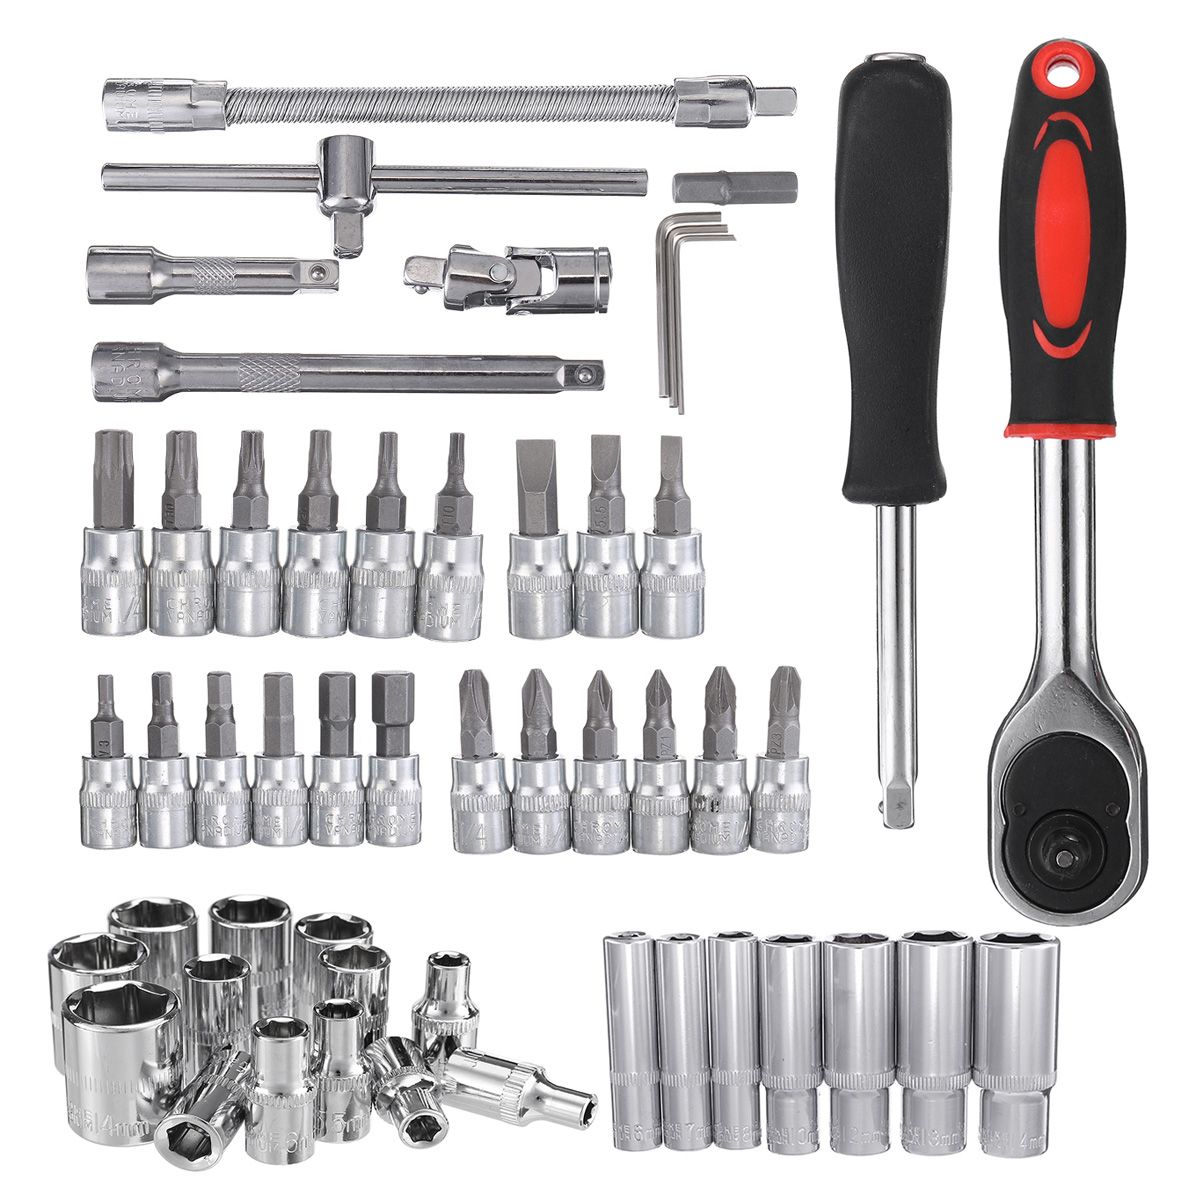 Ratchet-Wrench-Sleeve-Kit-Car-Boat-Motorcycle-Bicycle-Hardware-Repair-Tool-124653Pcs-1658195